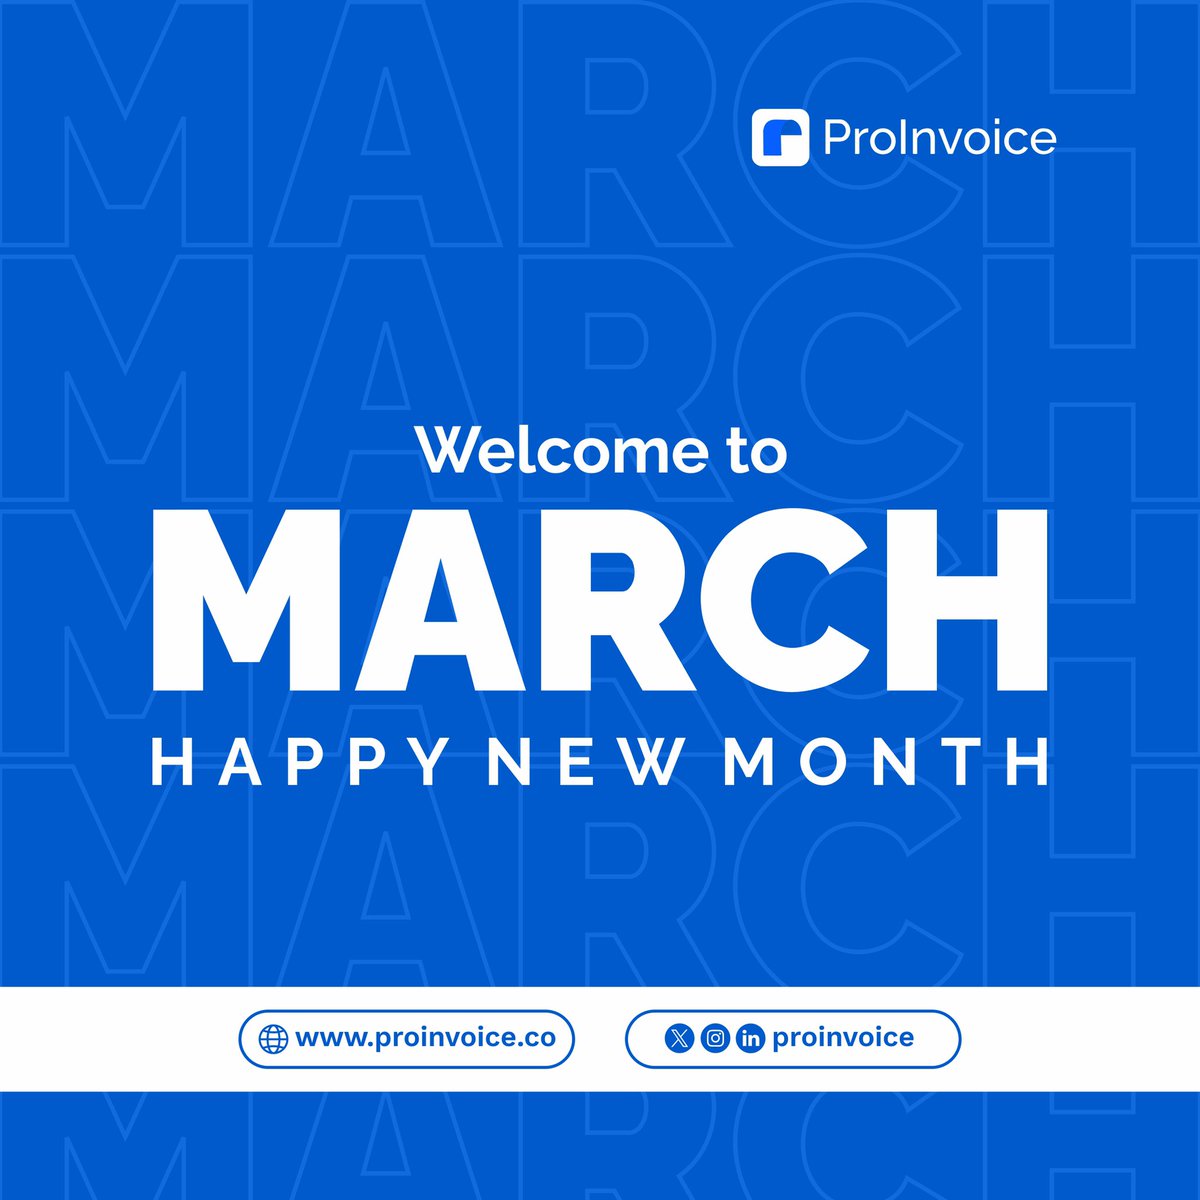 Cheers to a new month!

We enter profitable operations and opportunities this month. 

Wishing you seamless business operations this month.

#March #ProInvoice #NewMonth 
#growwithproinvoice #invoicingsoftware #business